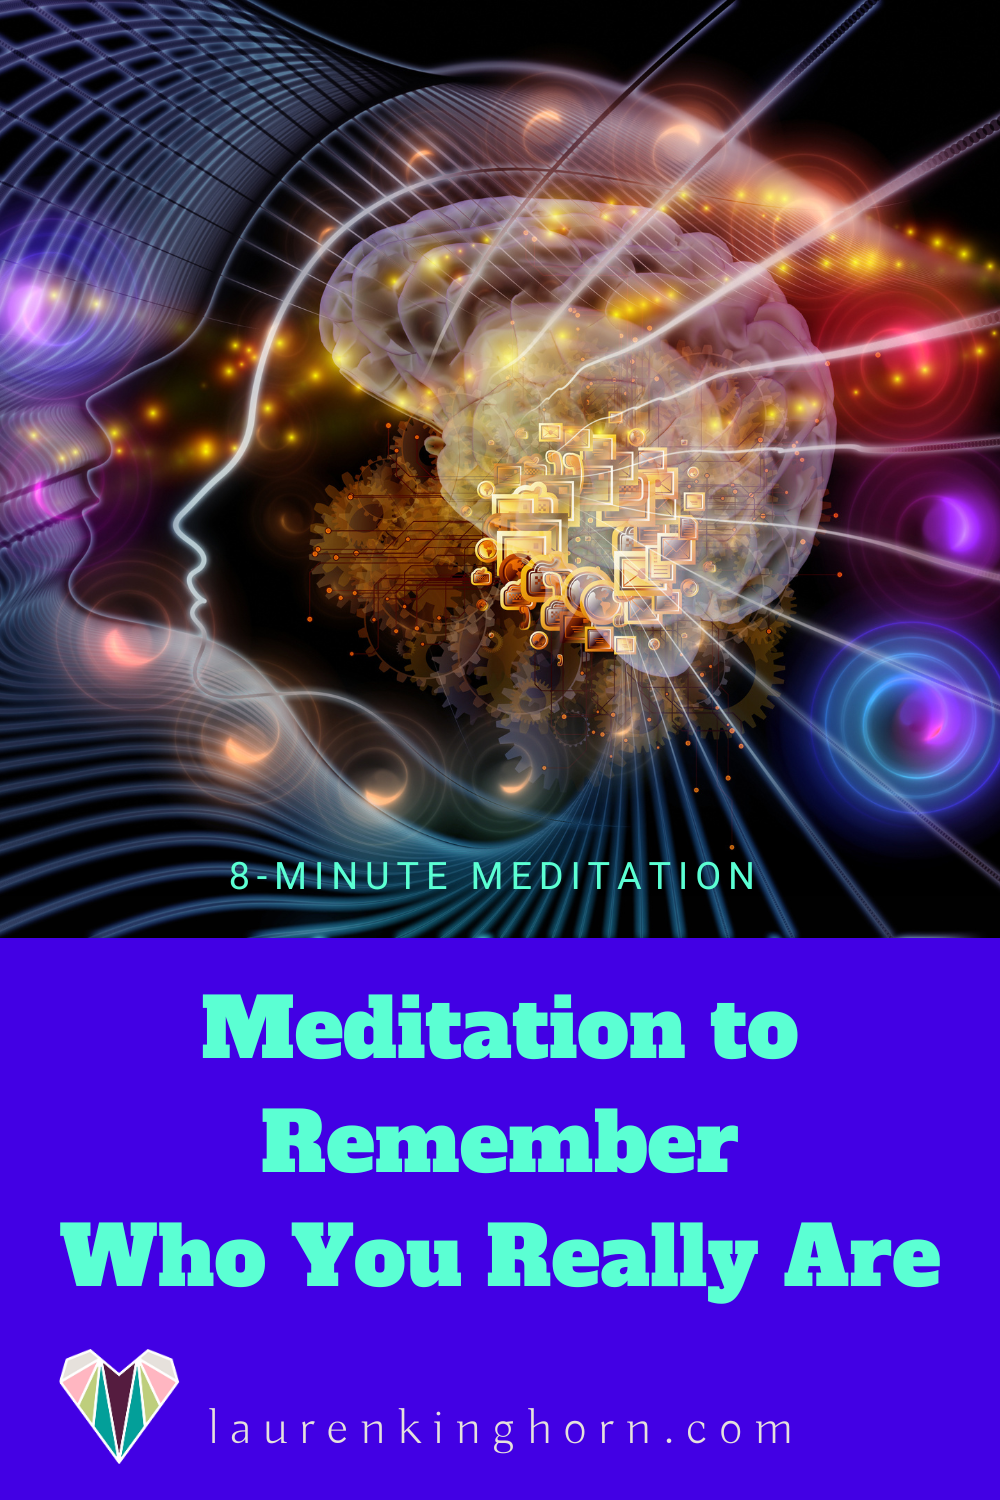 This 8-minute Meditation to Remember Who You Really Are is from the first day of my 5-day Longevity Challenge to Boost Lifespan, Healthspan, Mindspan, and Joyspan. In this post, you'll find the video, podcast and transcript of the meditation.